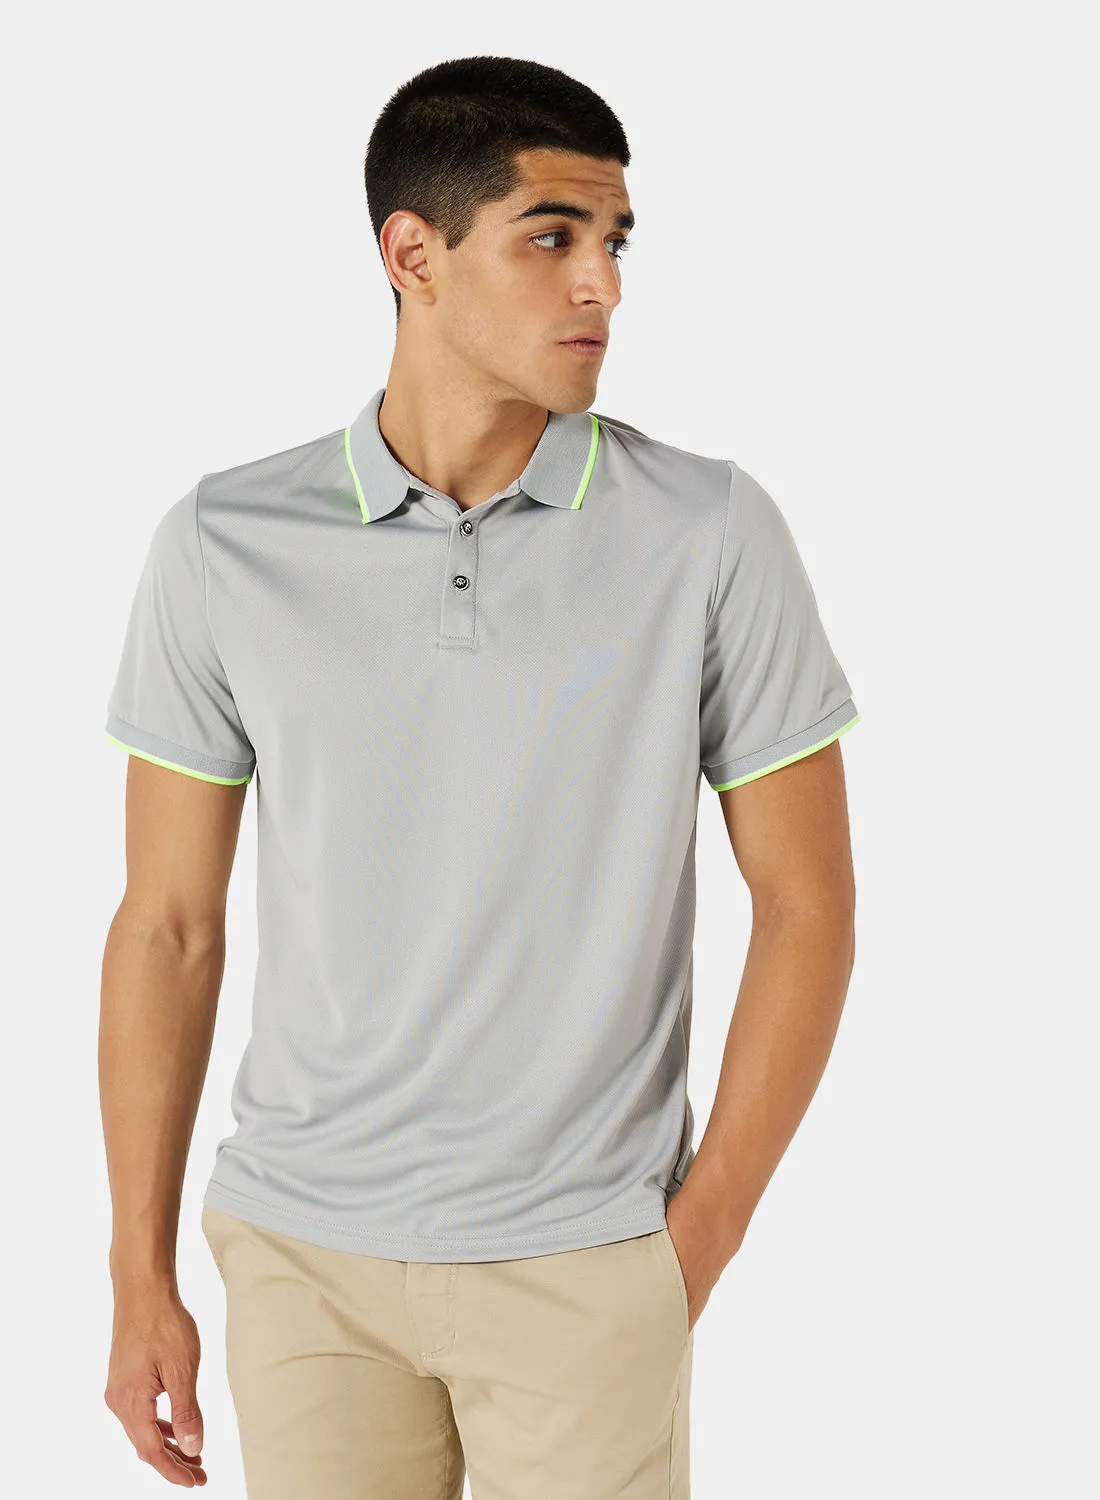 STYLISTPARK Basic Collared Piping Polo